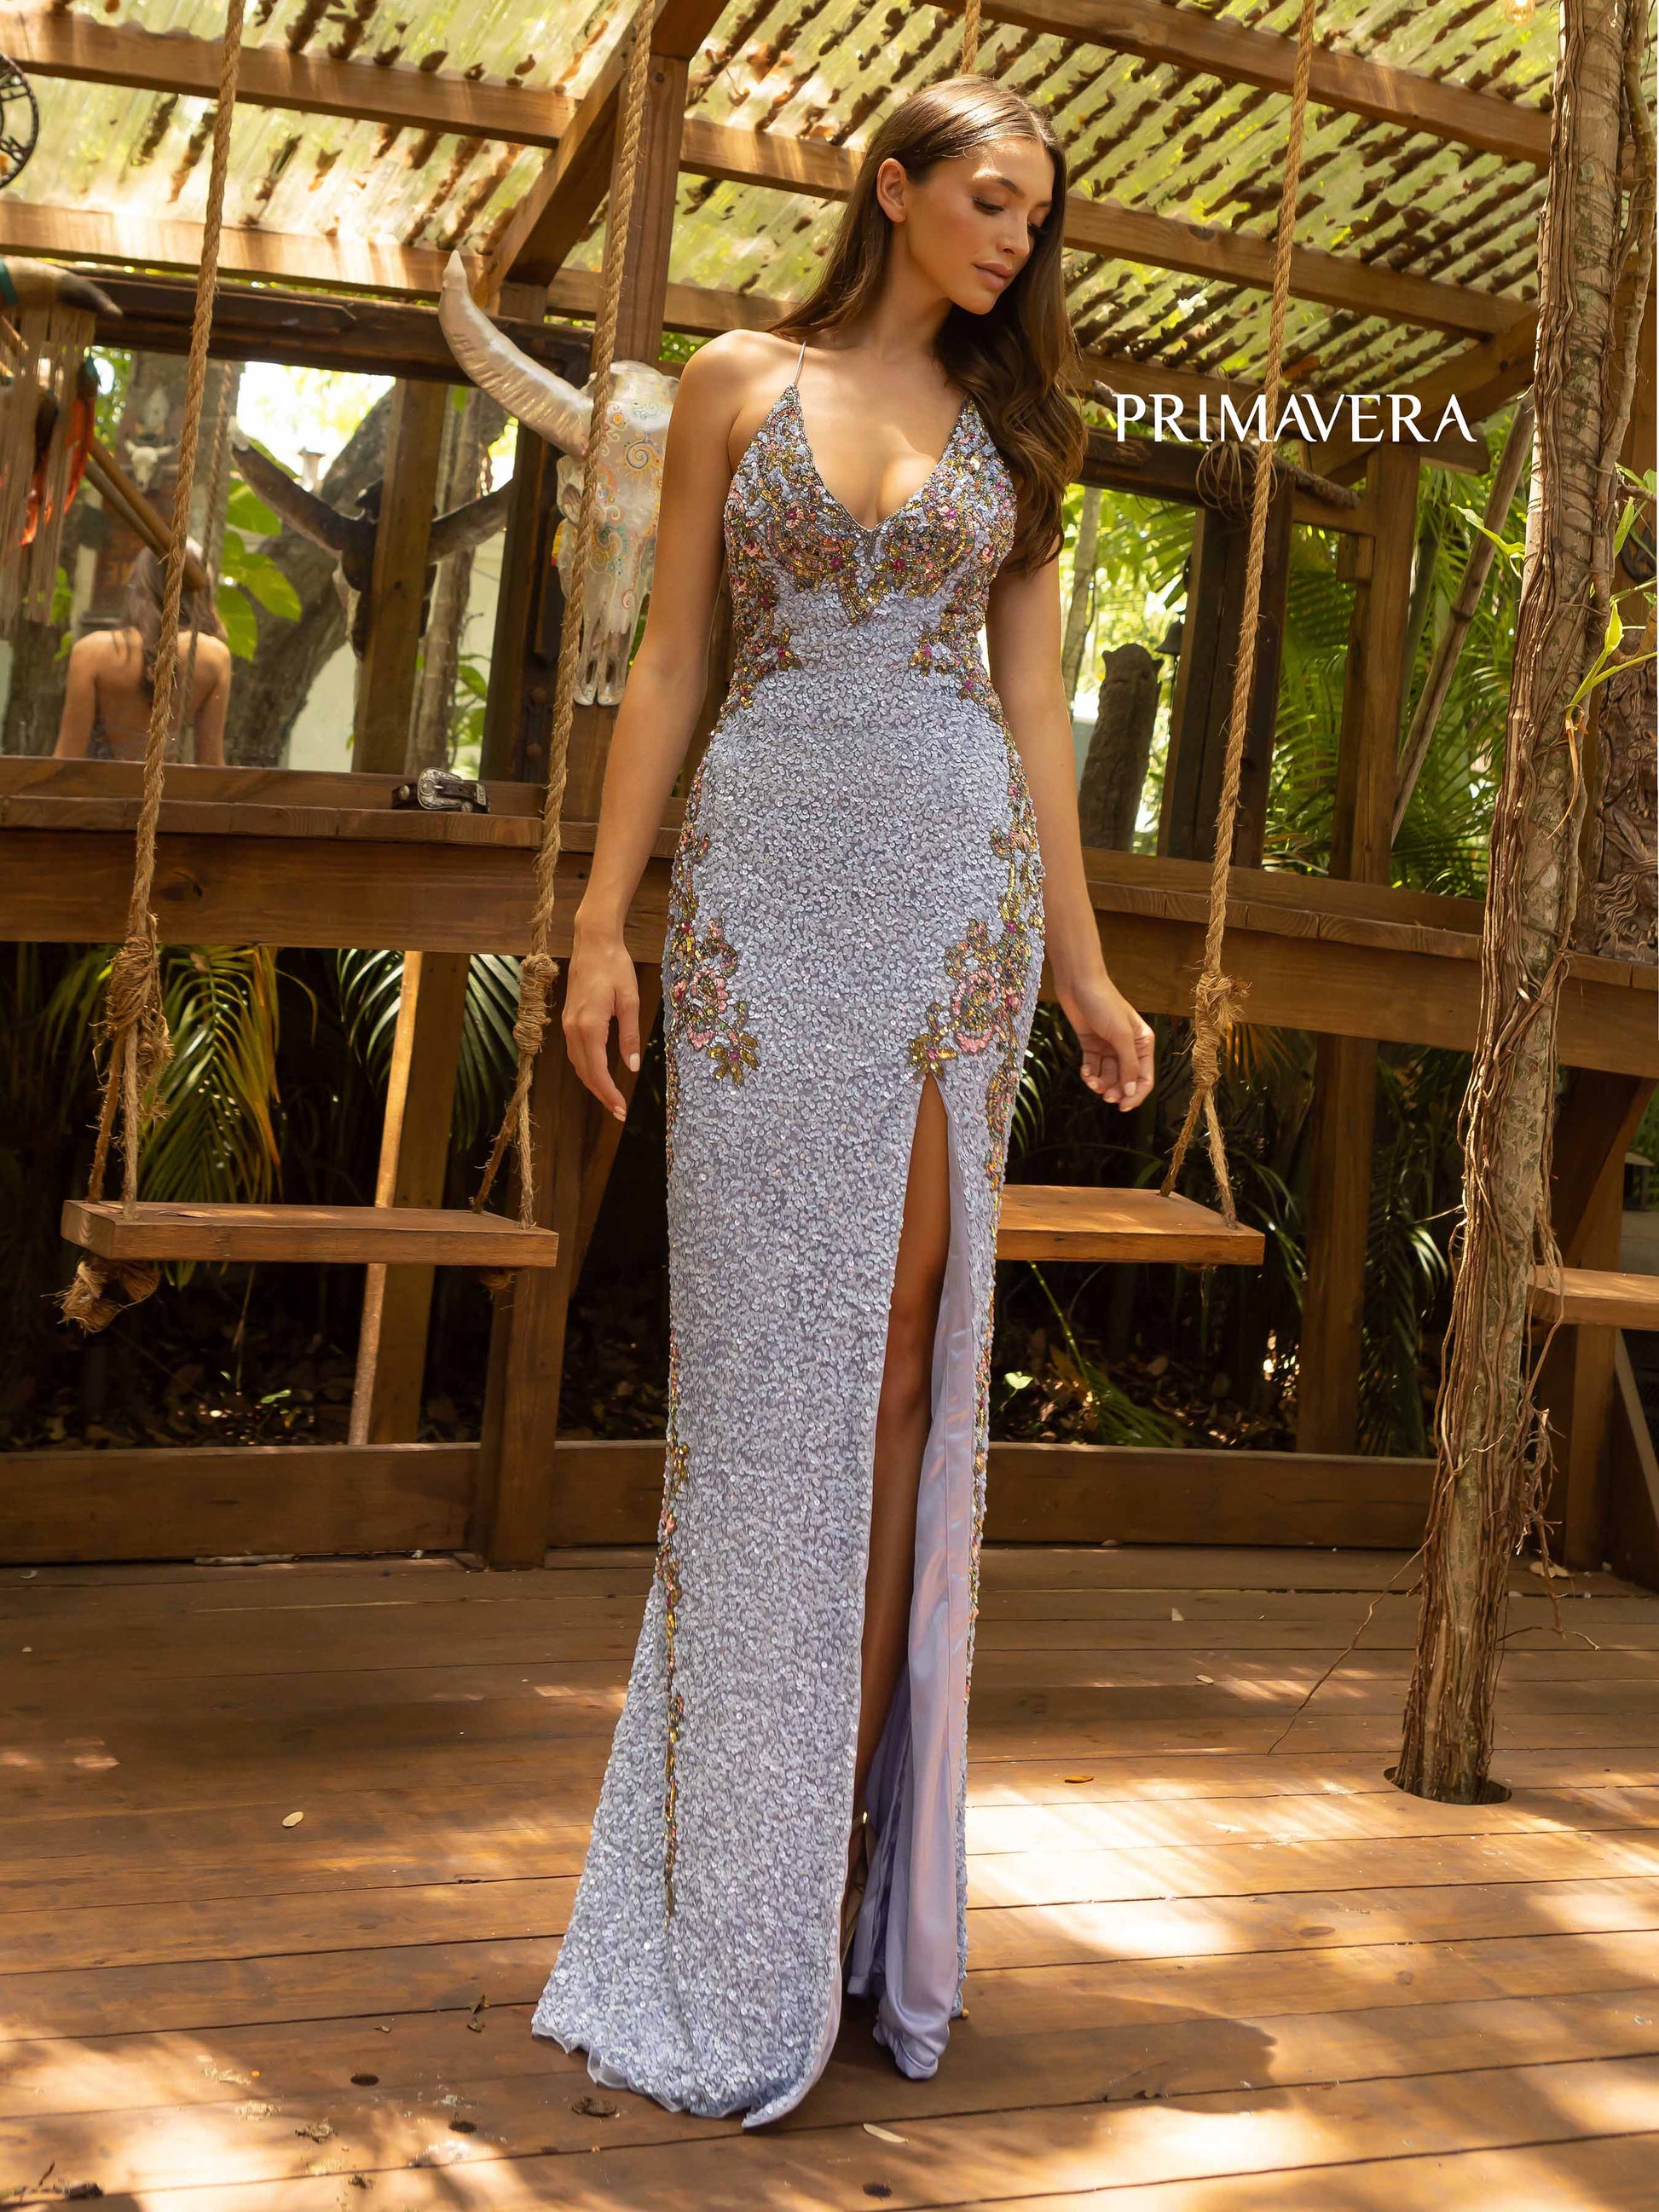 Primavera Couture 3211 Lilac  is a Long fitted sequin Embellished Formal Evening Gown. This Prom Dress Features a deep V Neck with an open Corset lace up back. Beaded & embellished elegant scroll pattern accentuate curves. Fully beaded prom dress with floral pattern and side slit. Long Sequin Gown featuring a v neckline. slit in the fitted skirt, Slit in Thigh. Stunning Pageant Dress, Prom Gown & More! front